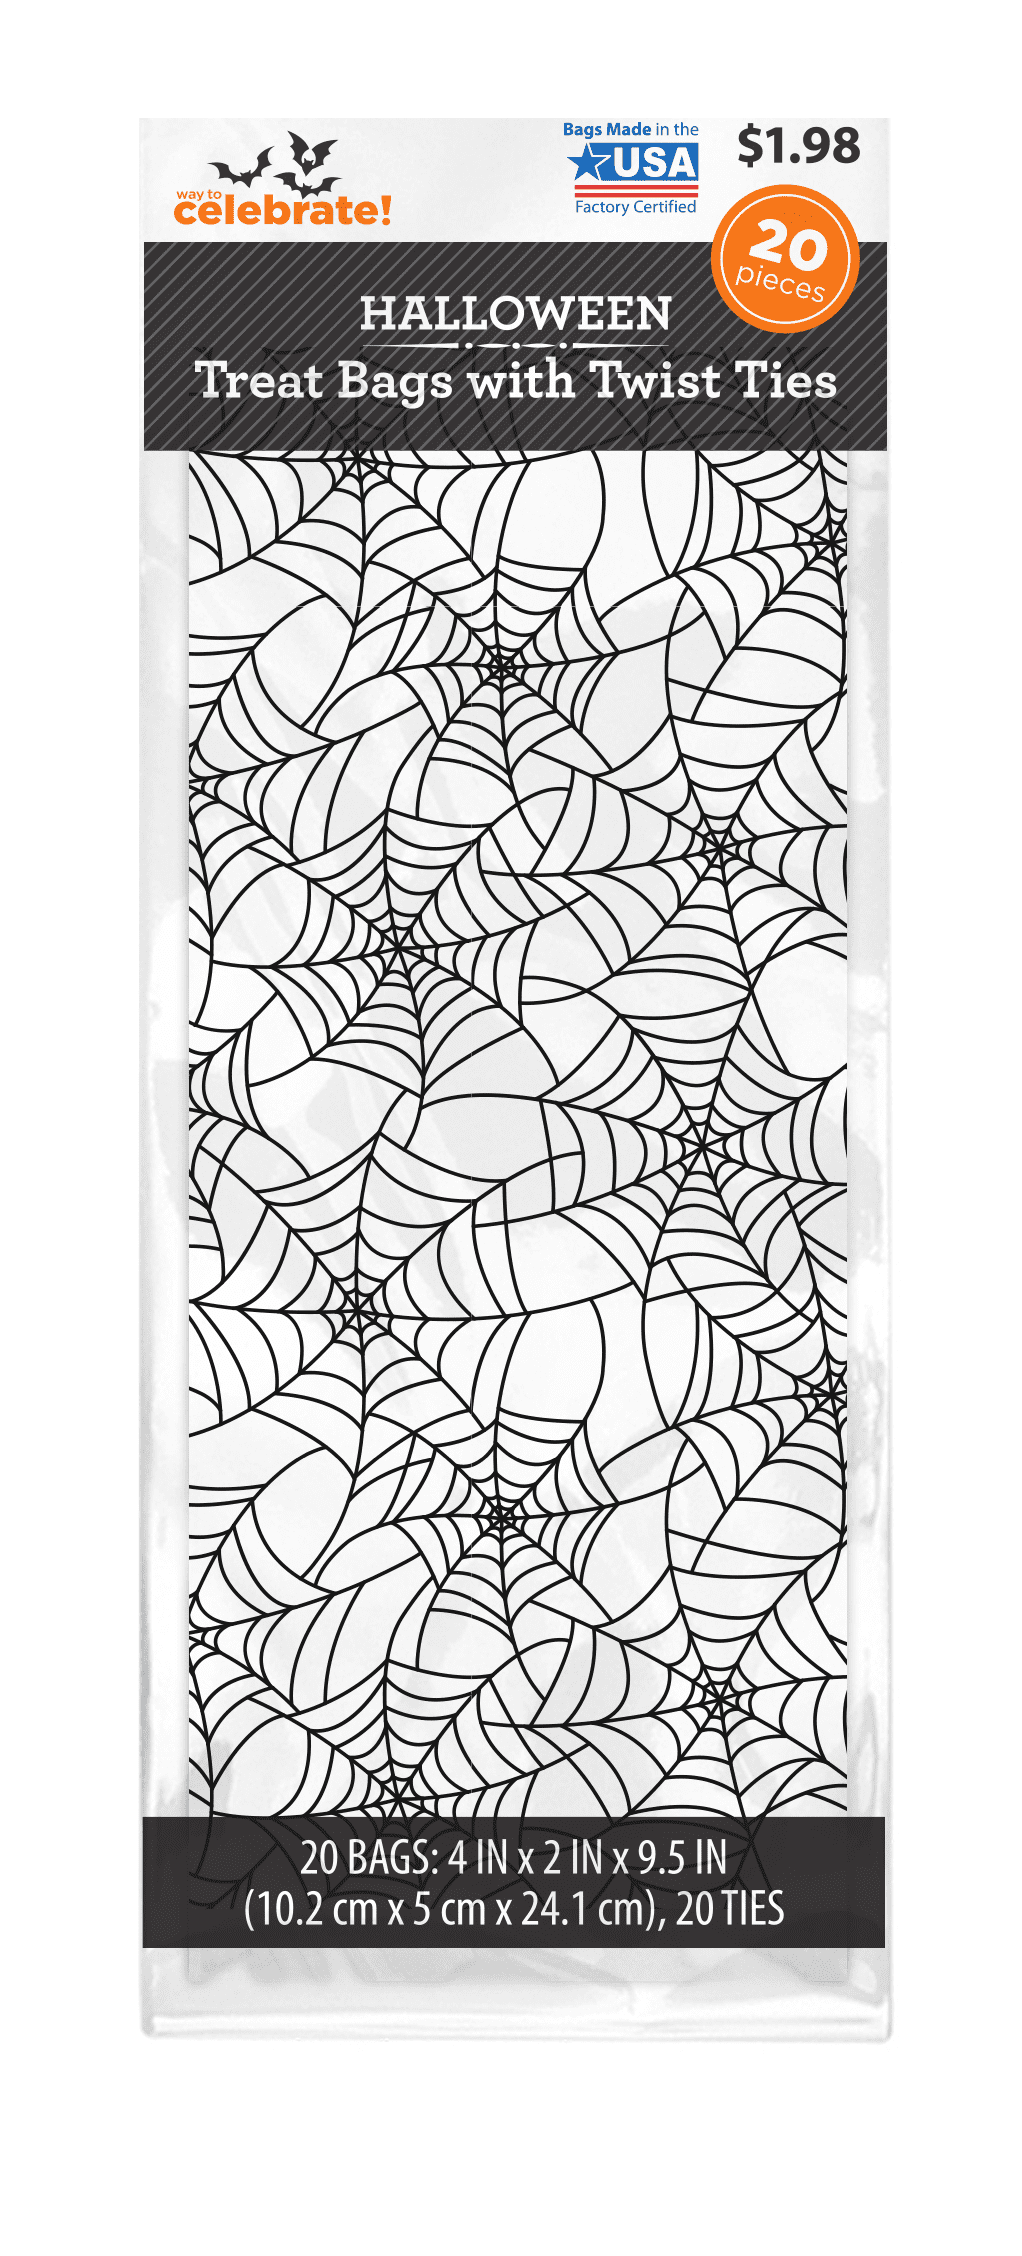 WAY TO CELEBRATE! Spiderweb Multi-color Cello Halloween Treat Party Bags, with Twist Ties 20 Count